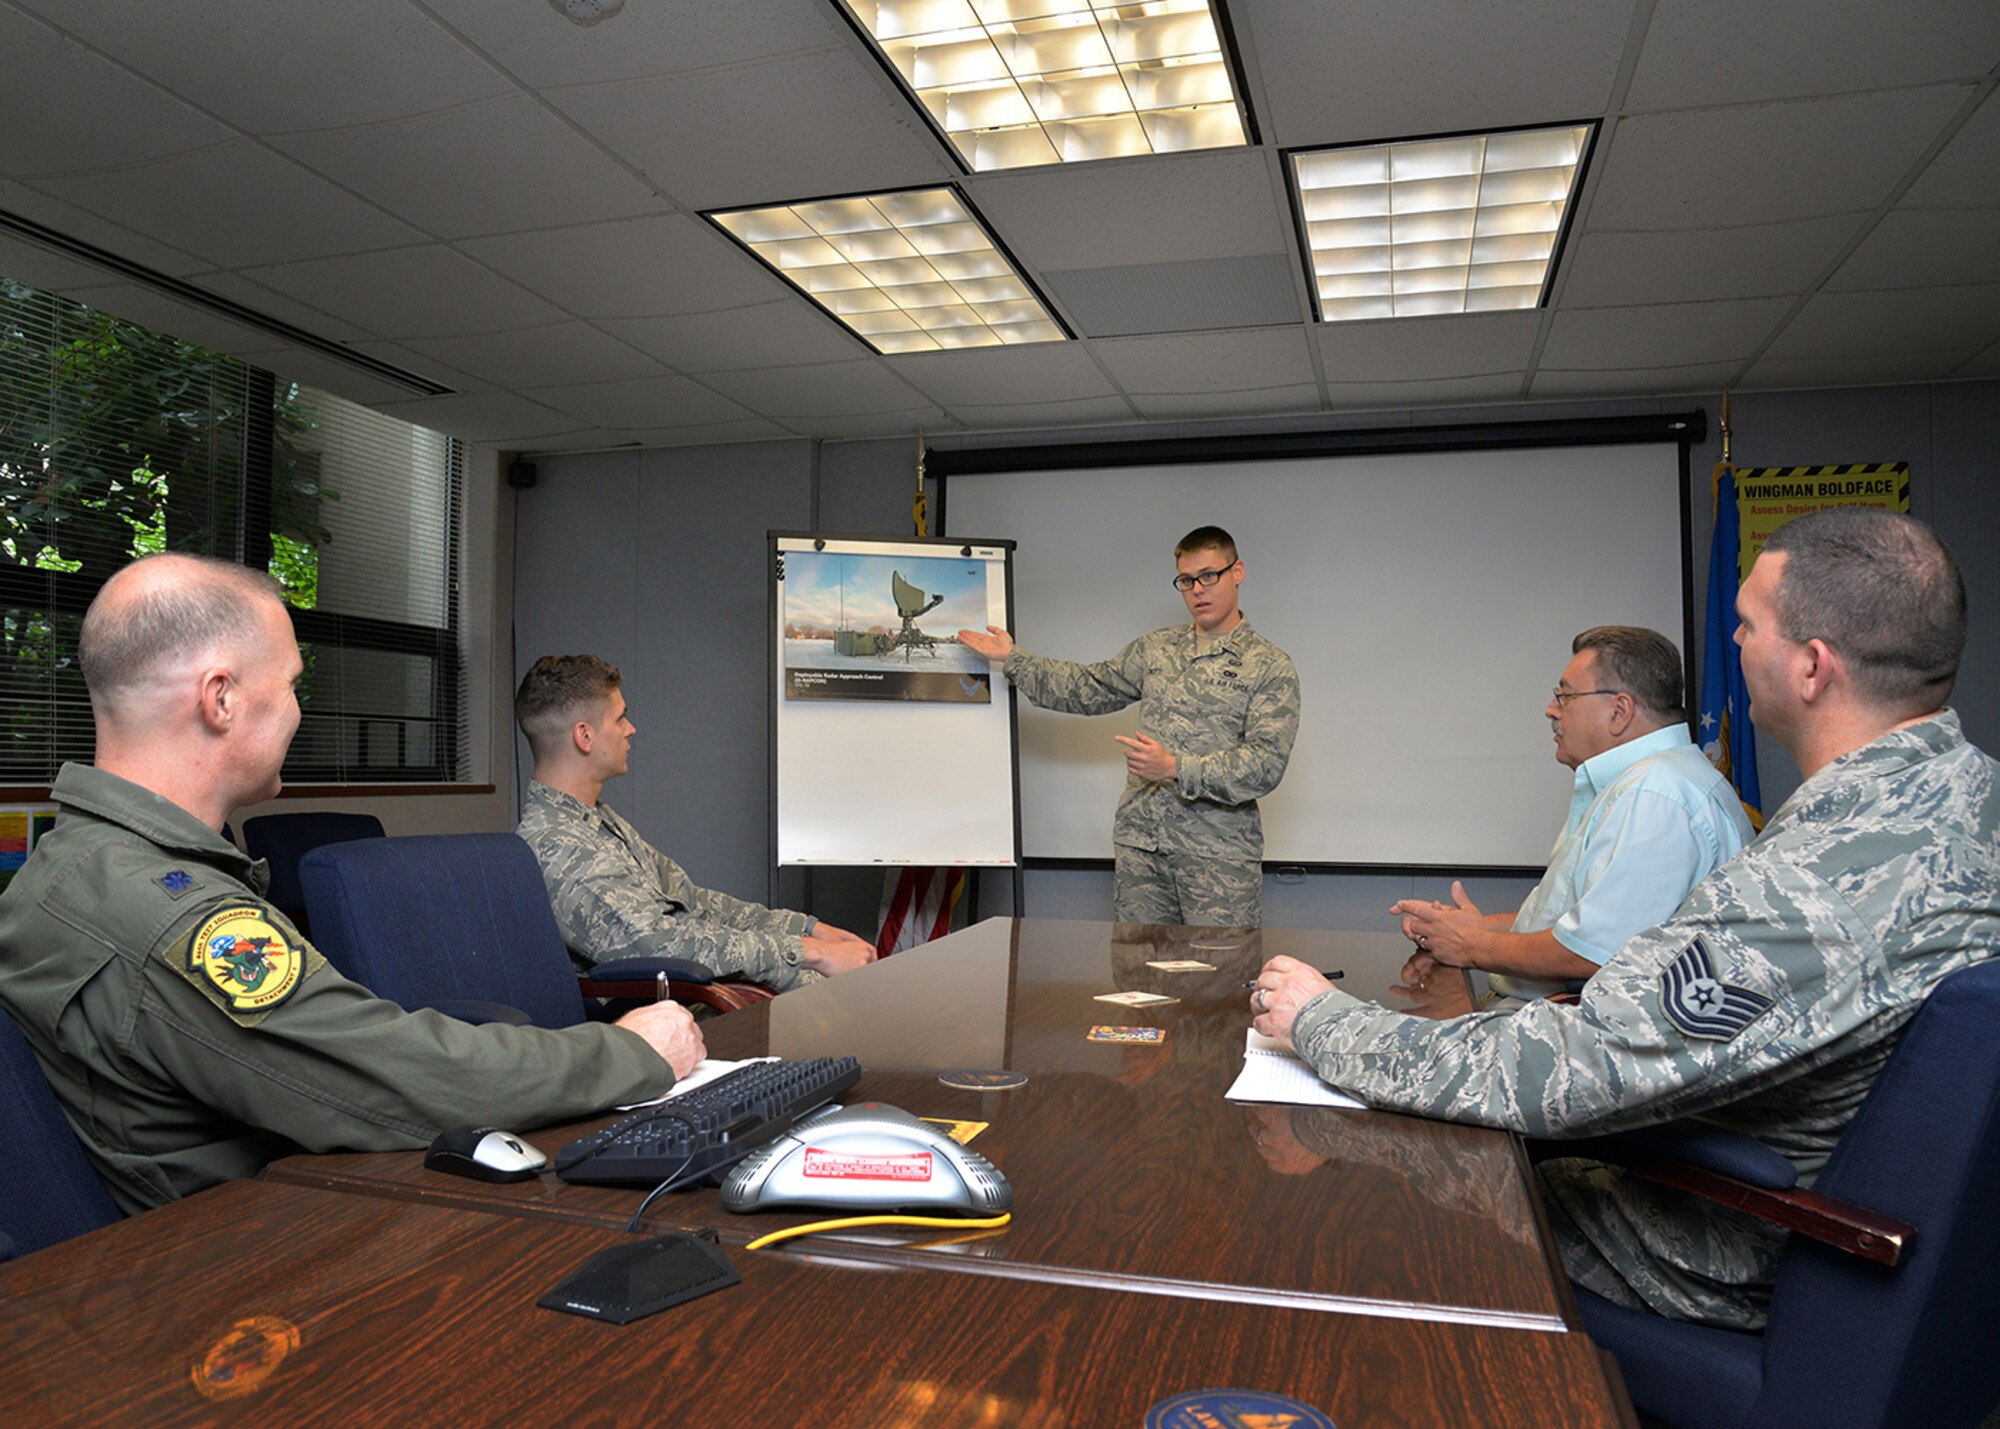 Second Lt. Nic Cincotti, Command and Control test manager, 46th Test Squadron, Detachment 1, speaks to other members of the detachment about the support the group provides to program offices at Hanscom Air Force Base, Mass., July 13. Listening at the table from left-to-right is Lt. Col. Corey Beaverson, commander; 1st Lt. Matt Neau, C2 Cybersecurity test engineer; Jim Bordini, test engineer; and Tech. Sgt. James Pryor, Cybersecurity test manager. The detachment supports Hanscom by being the access point to the test community. (U.S. Air Force photo by Linda LaBonte Britt)